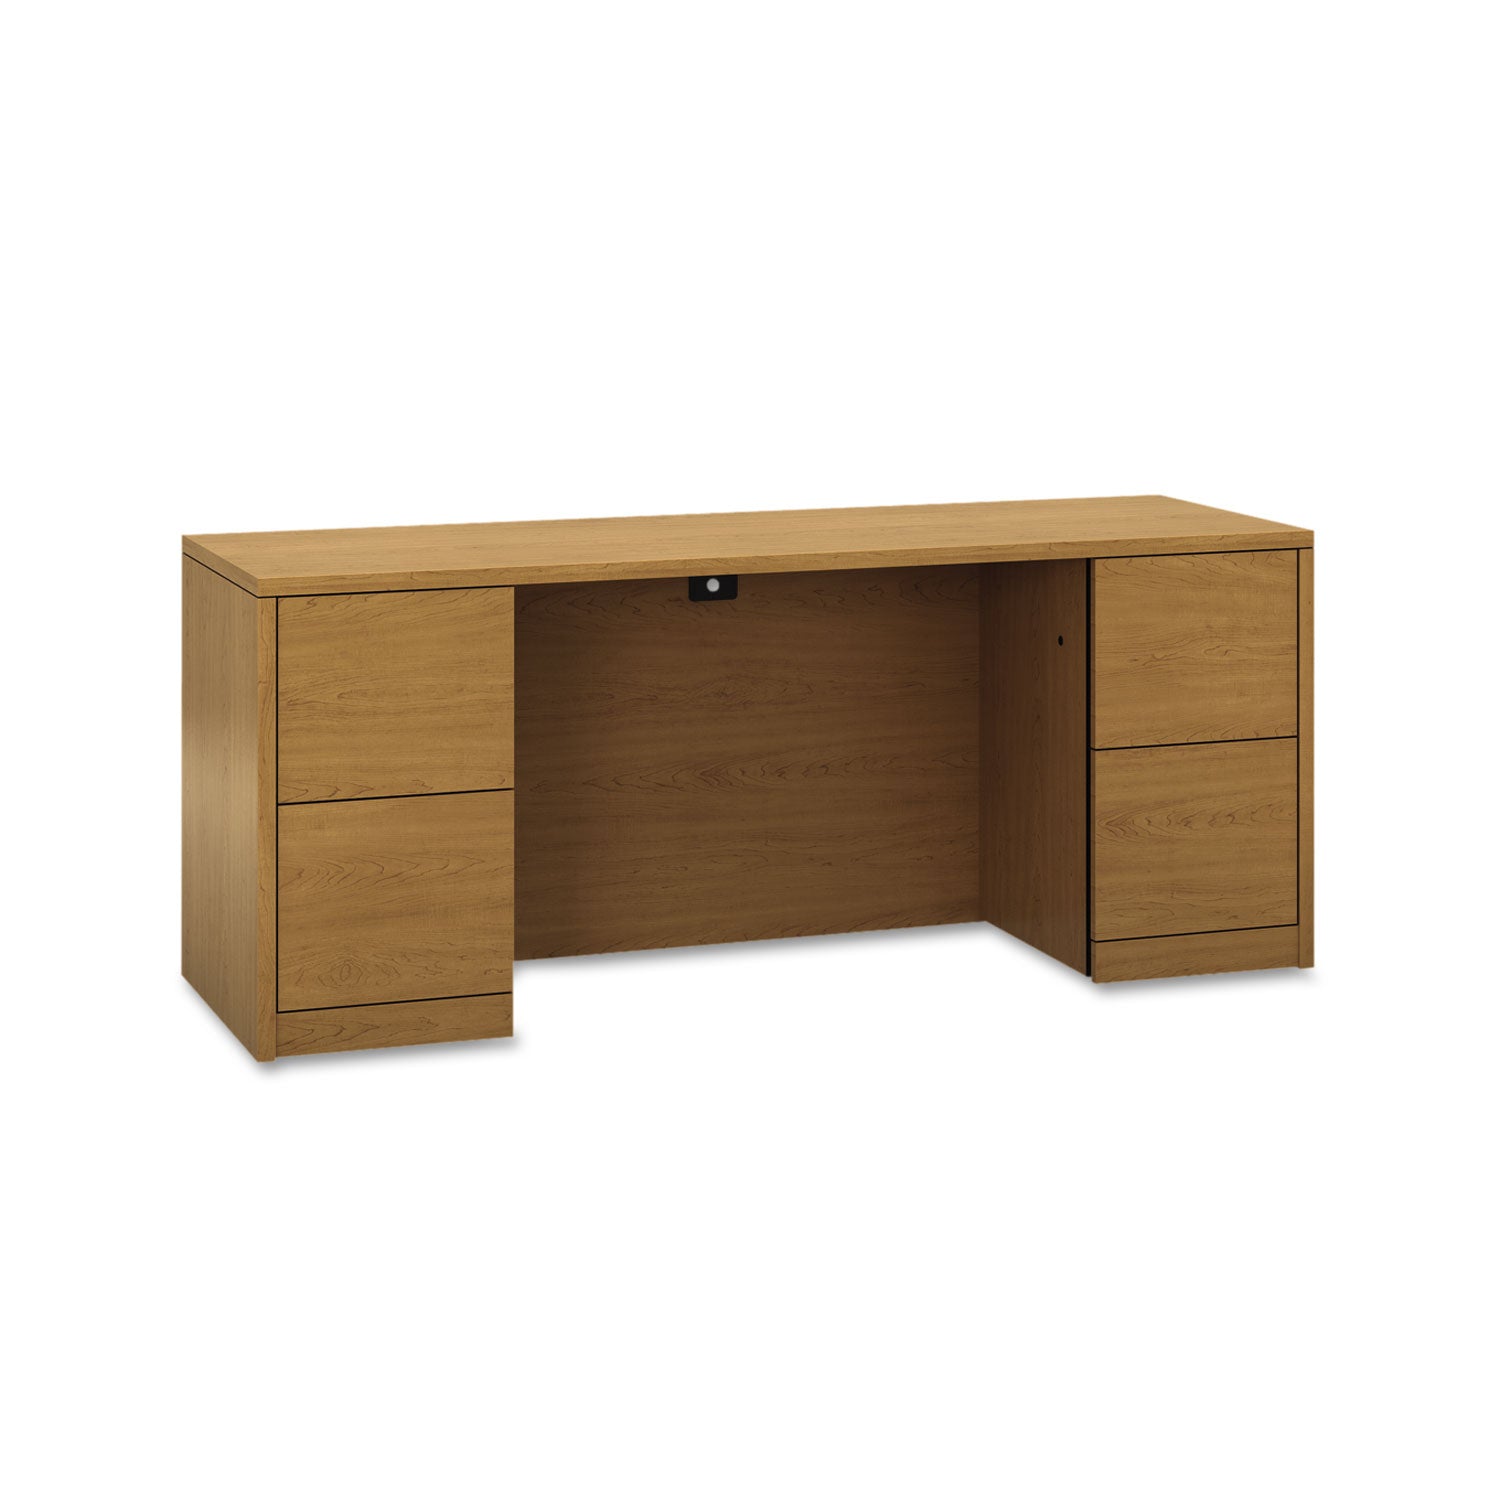 10500 Series Kneespace Credenza With Full-Height Pedestals, 72w x 24d x 29.5h, Harvest - 